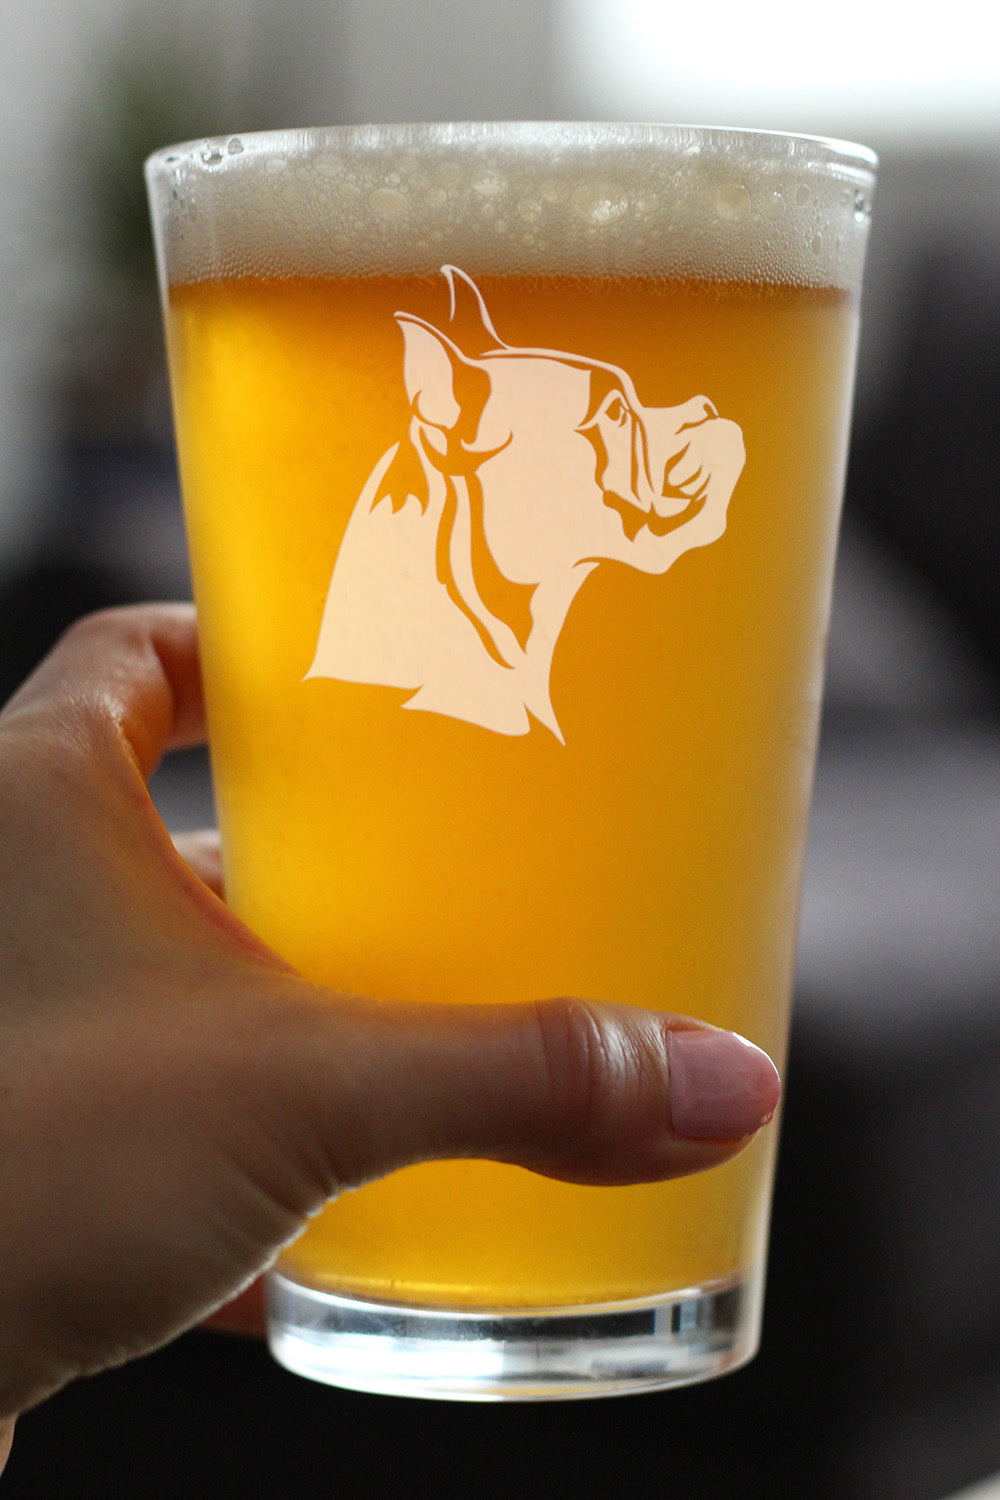 Boxer with Pointed Ears - Pint Glass for Beer - Fun Unique Boxer Themed Dog Gifts and Party Decor for Women and Men - 16 oz